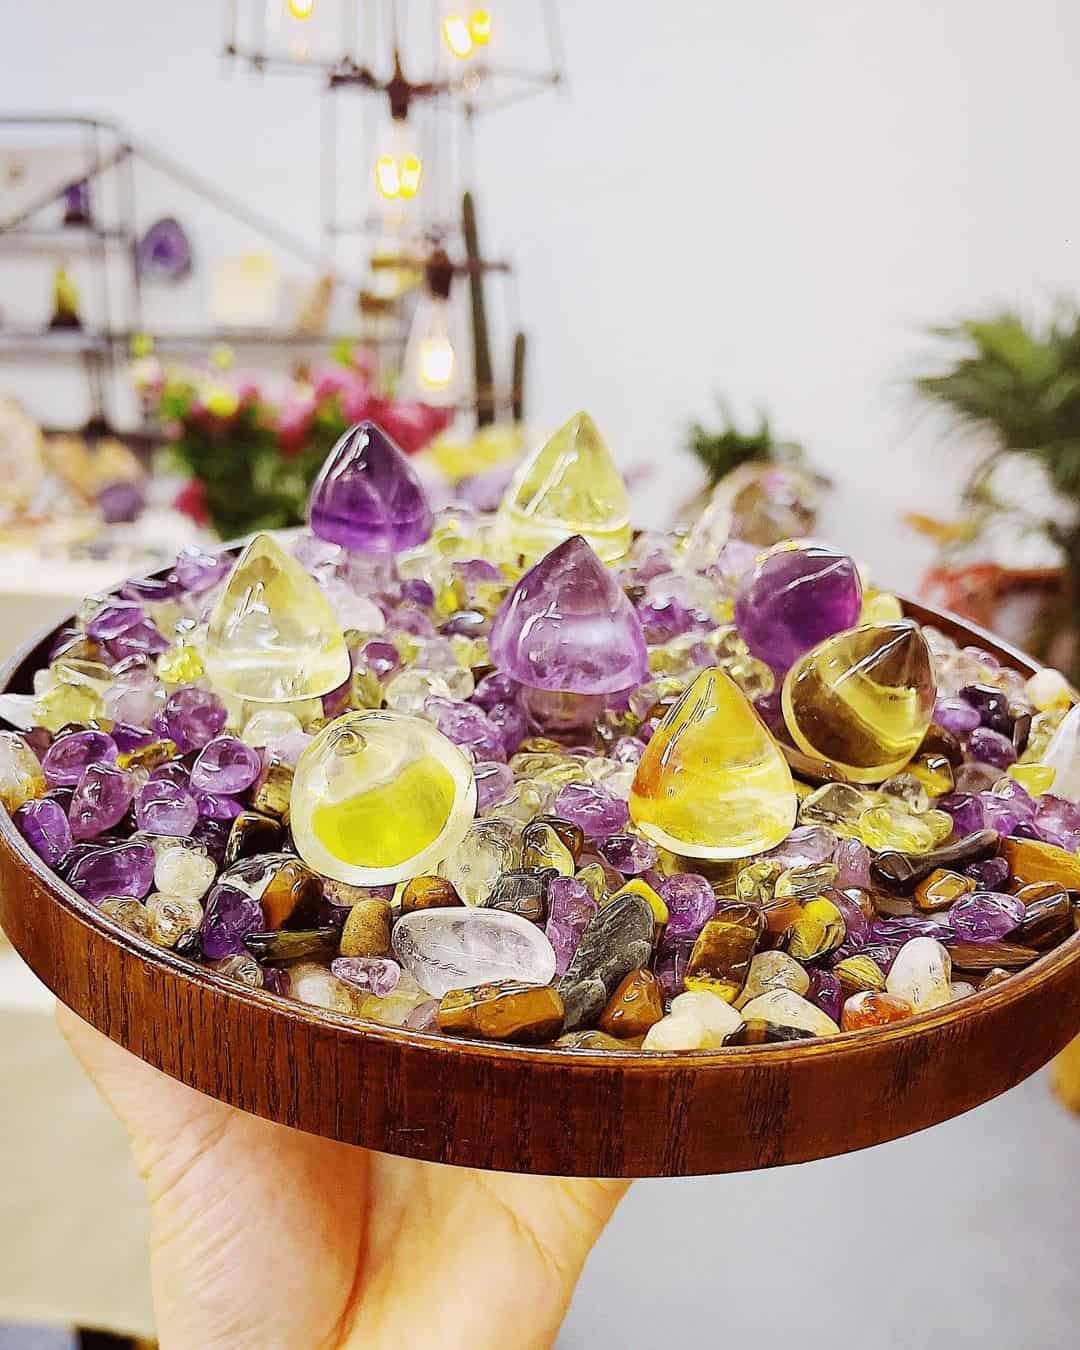 Dreams of being surrounded by crystals suggest that you need to look around you